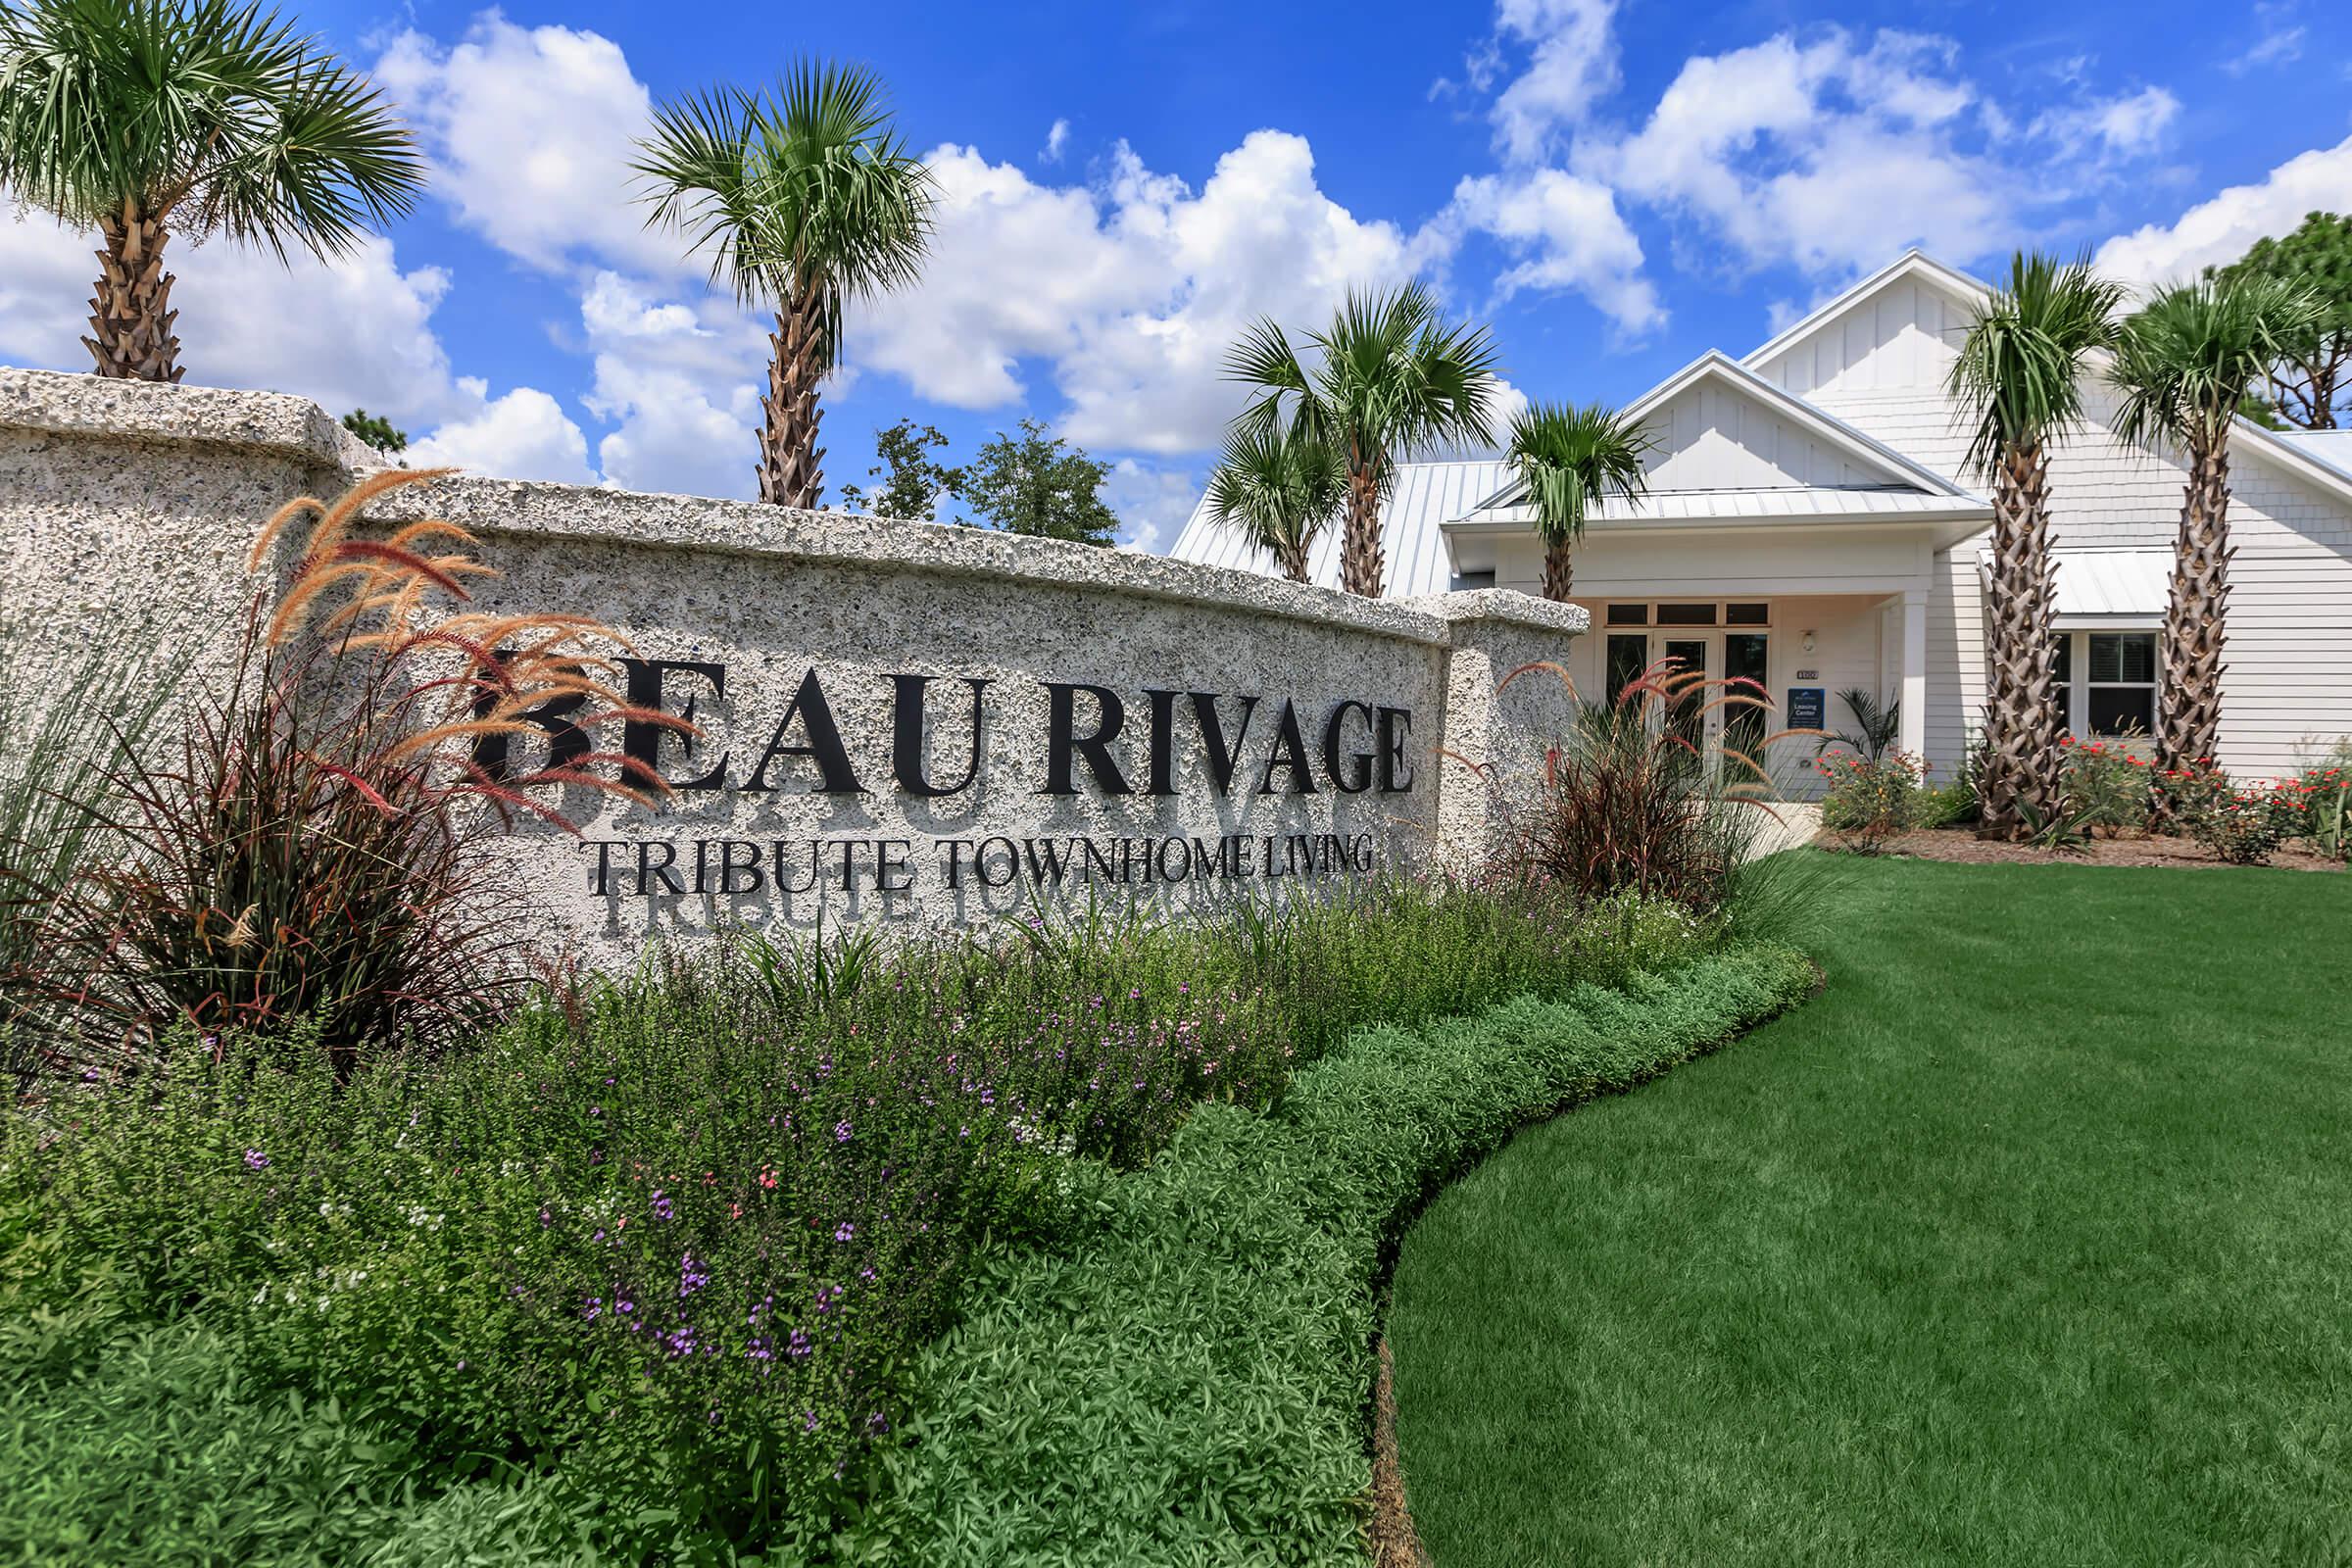 The entrance to your new home at The Townhomes at Beau Rivage in Wilmington, North Carolina.